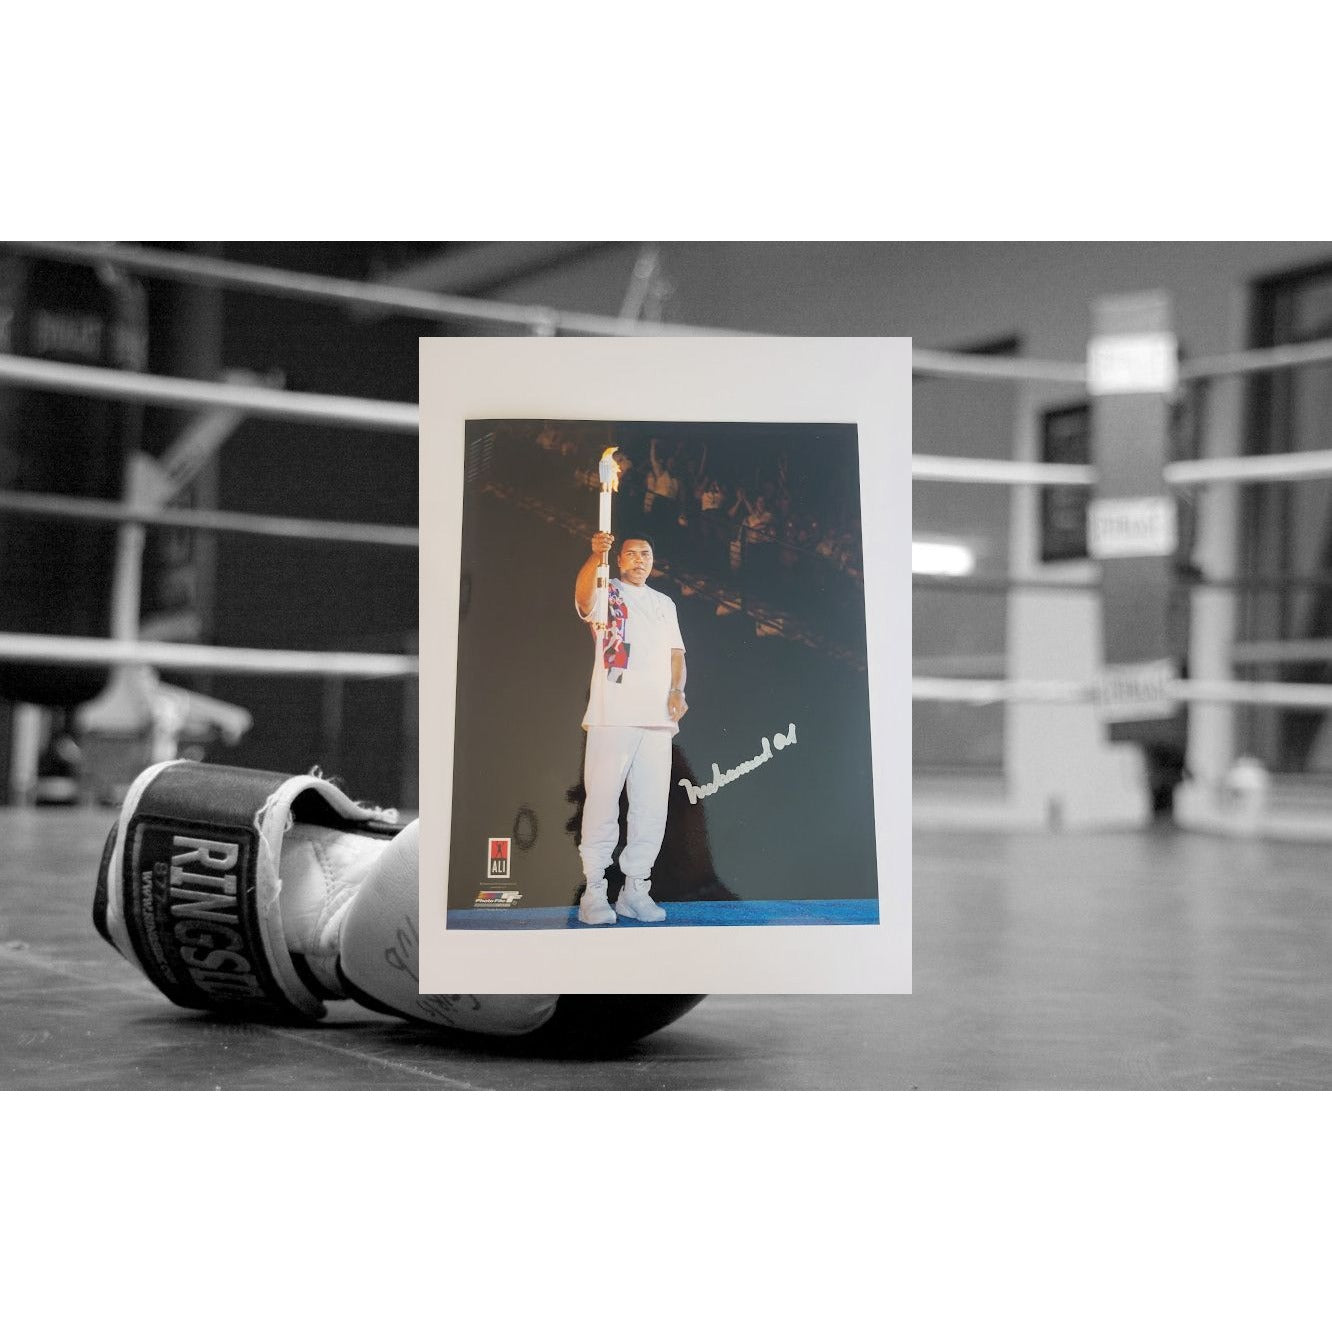 Muhammad Ali holding the Olympic torch 8 x 10 photo signed with proof